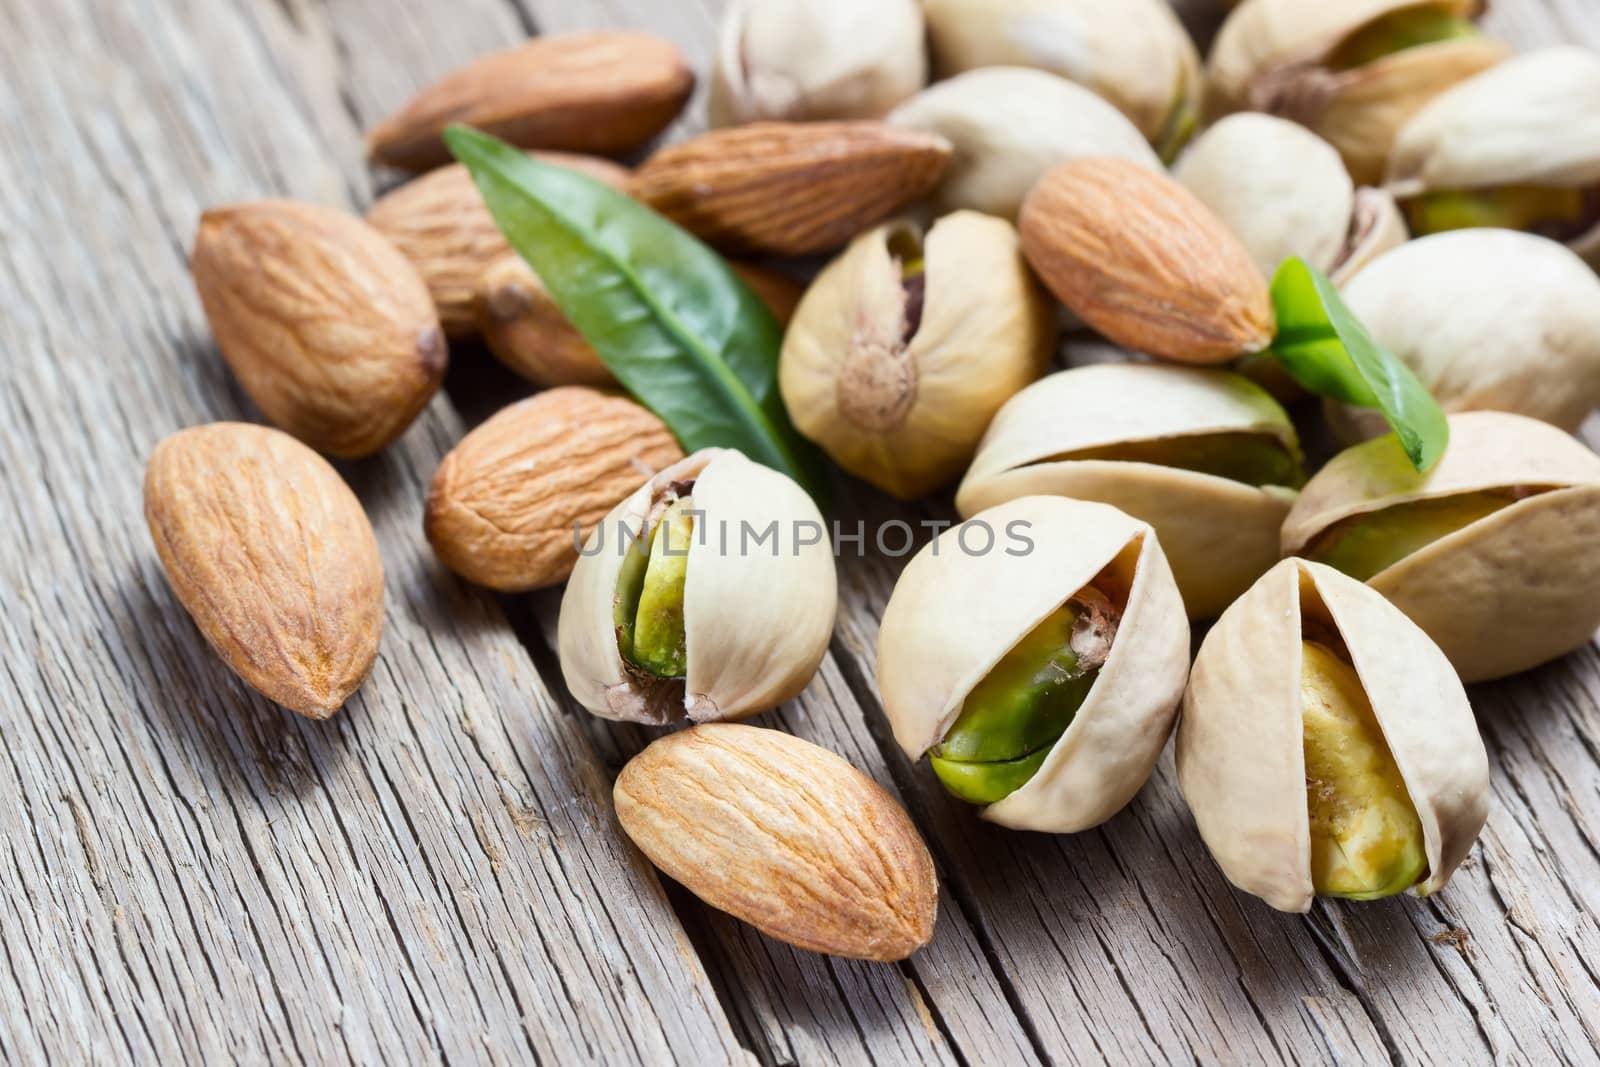 Almond and pistachio with leaves on wooden background